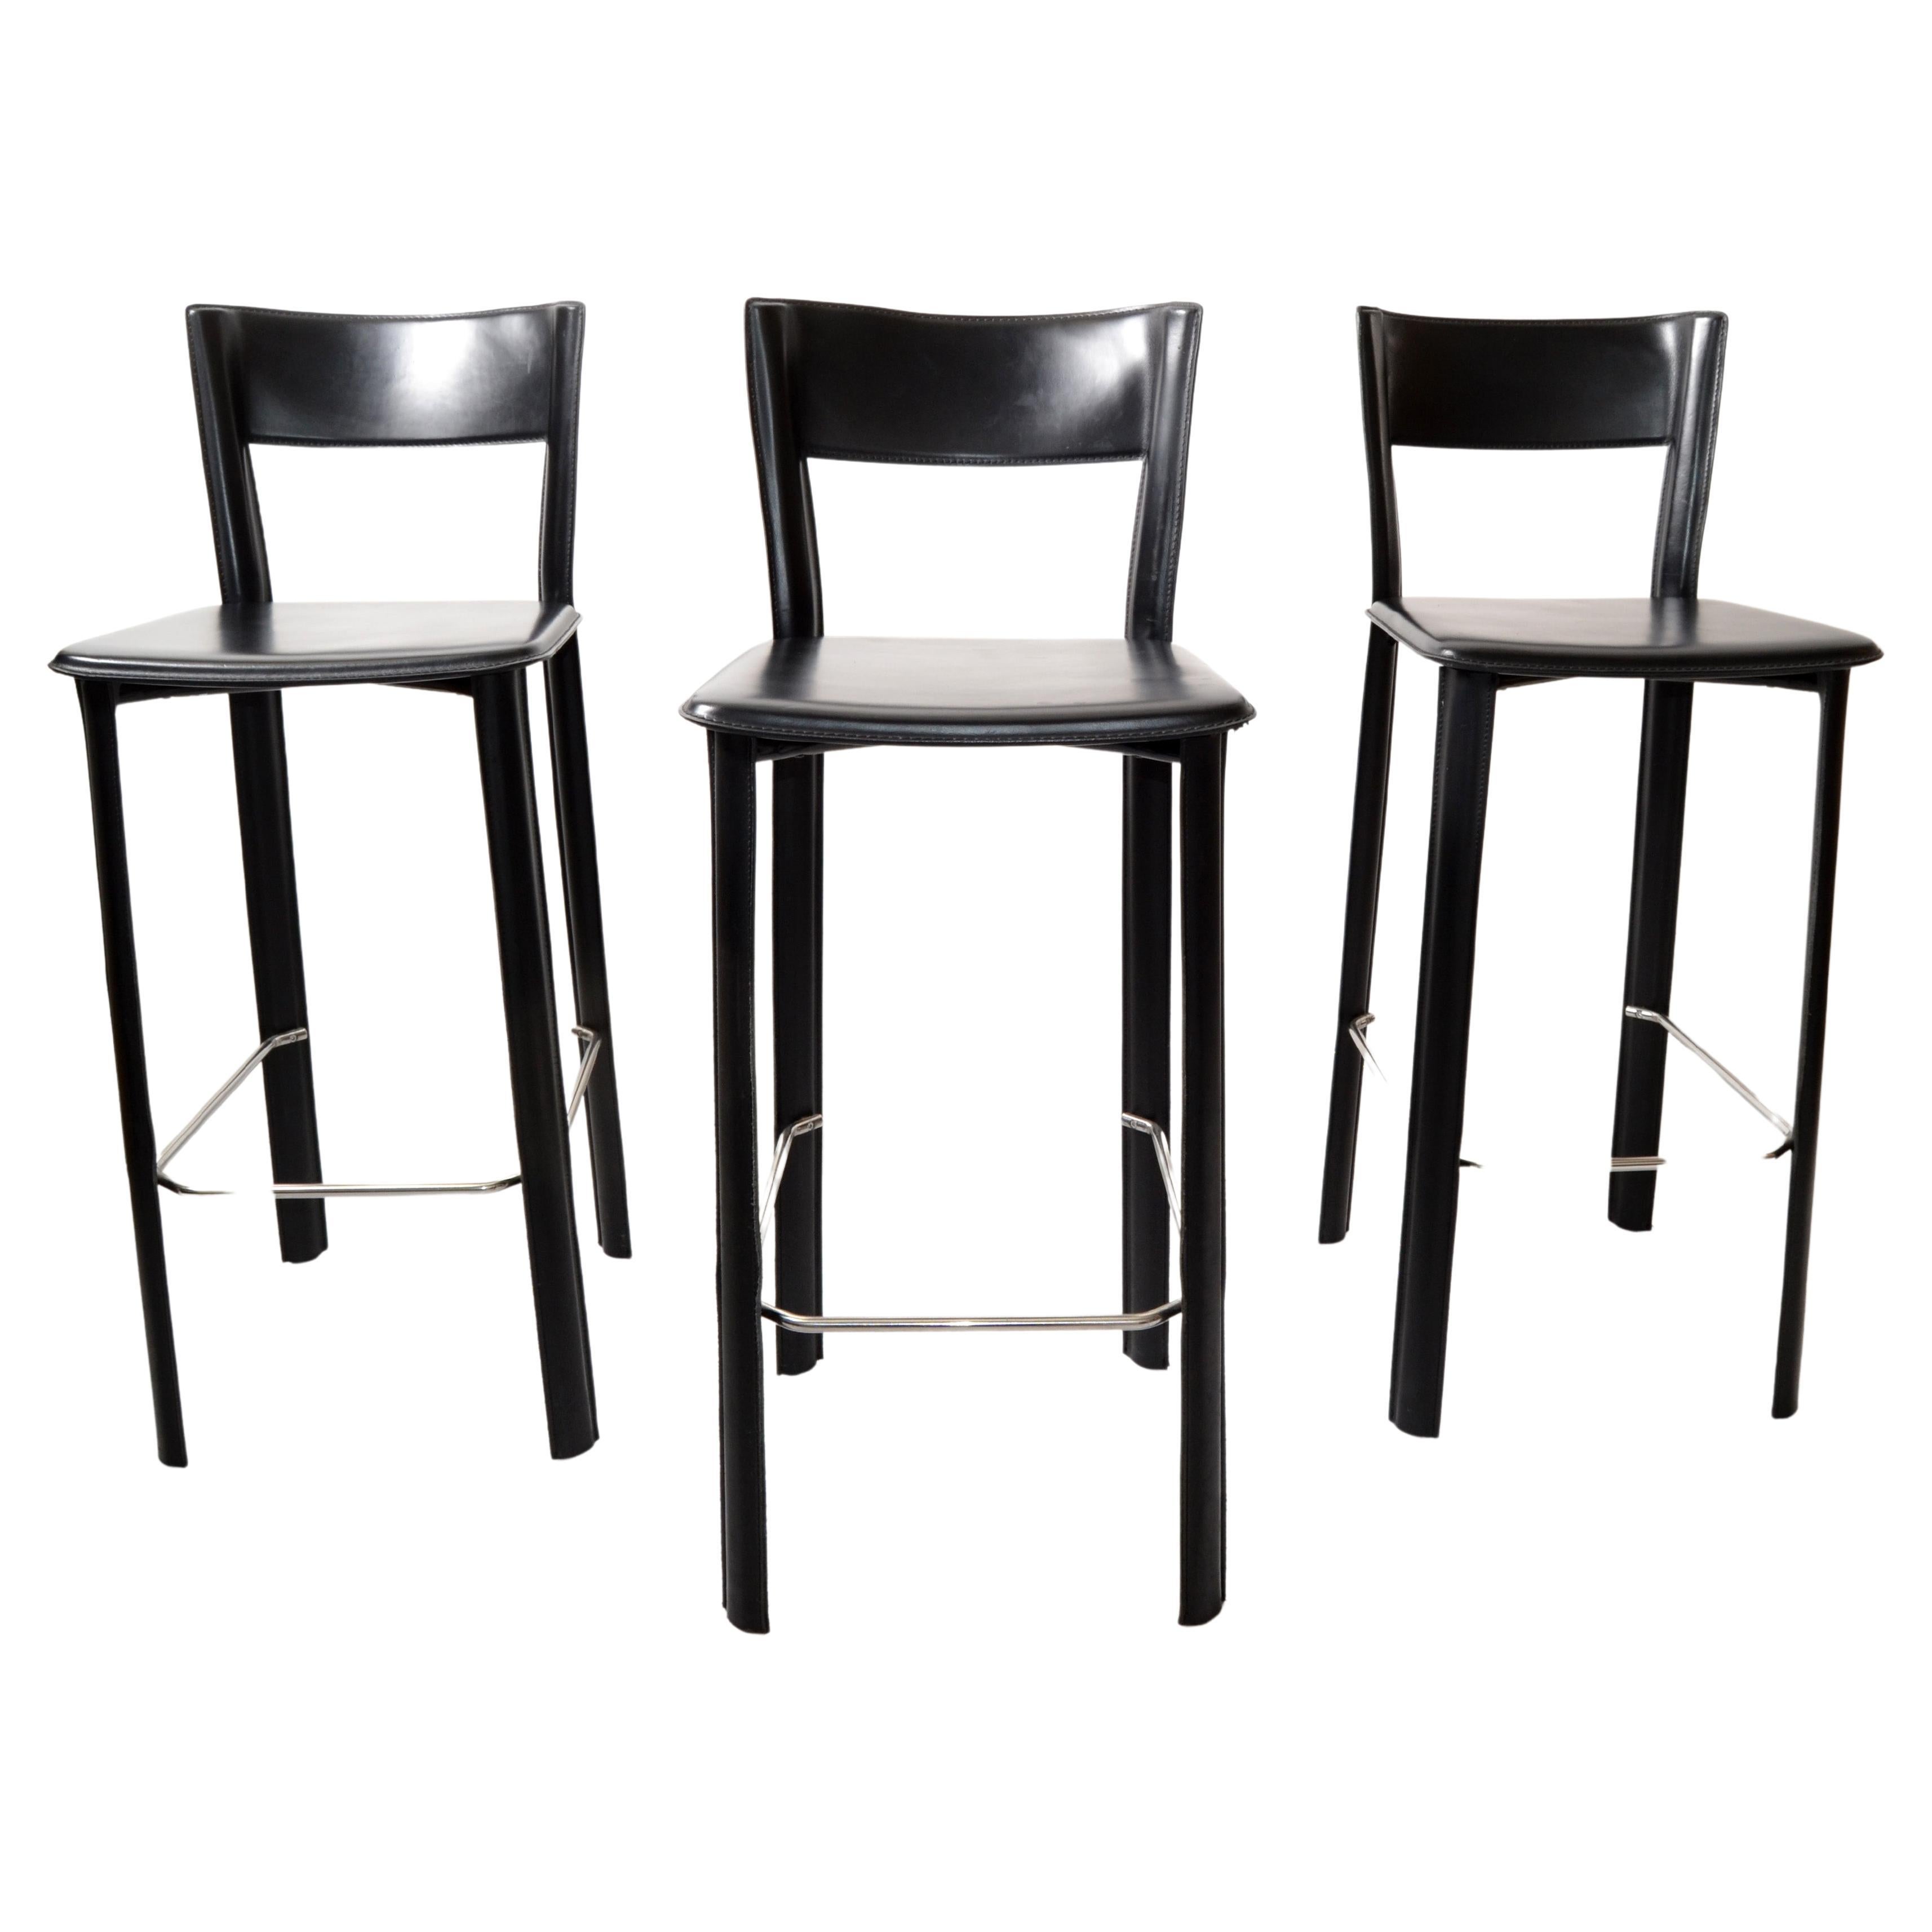 Set of 3 Italian Hand Stitched Frag Black Leather Chrome Bar Stools Contemporary